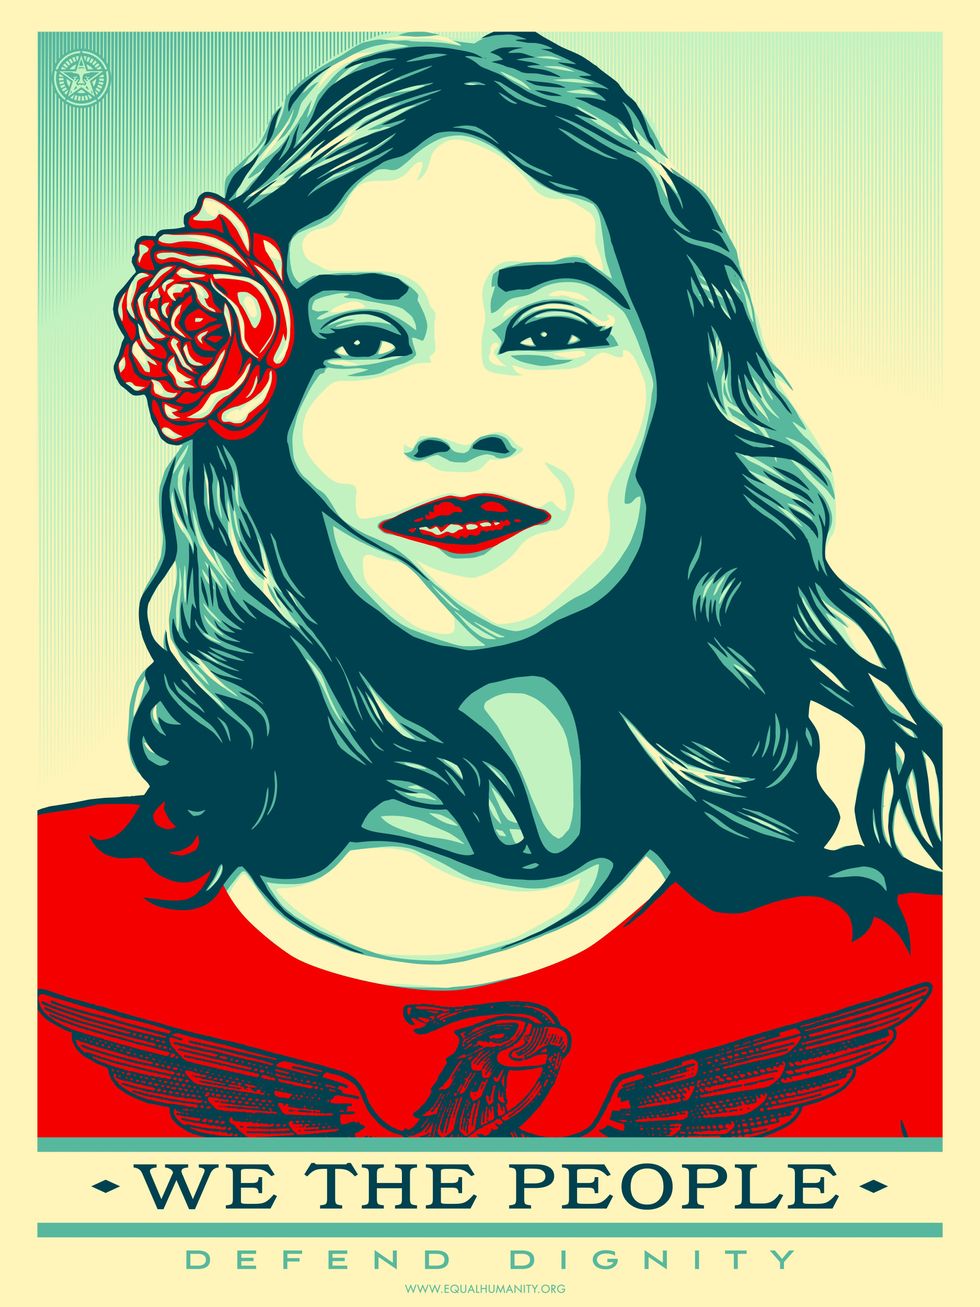 We The People - Shepard Fairey, "Defend Dignity"